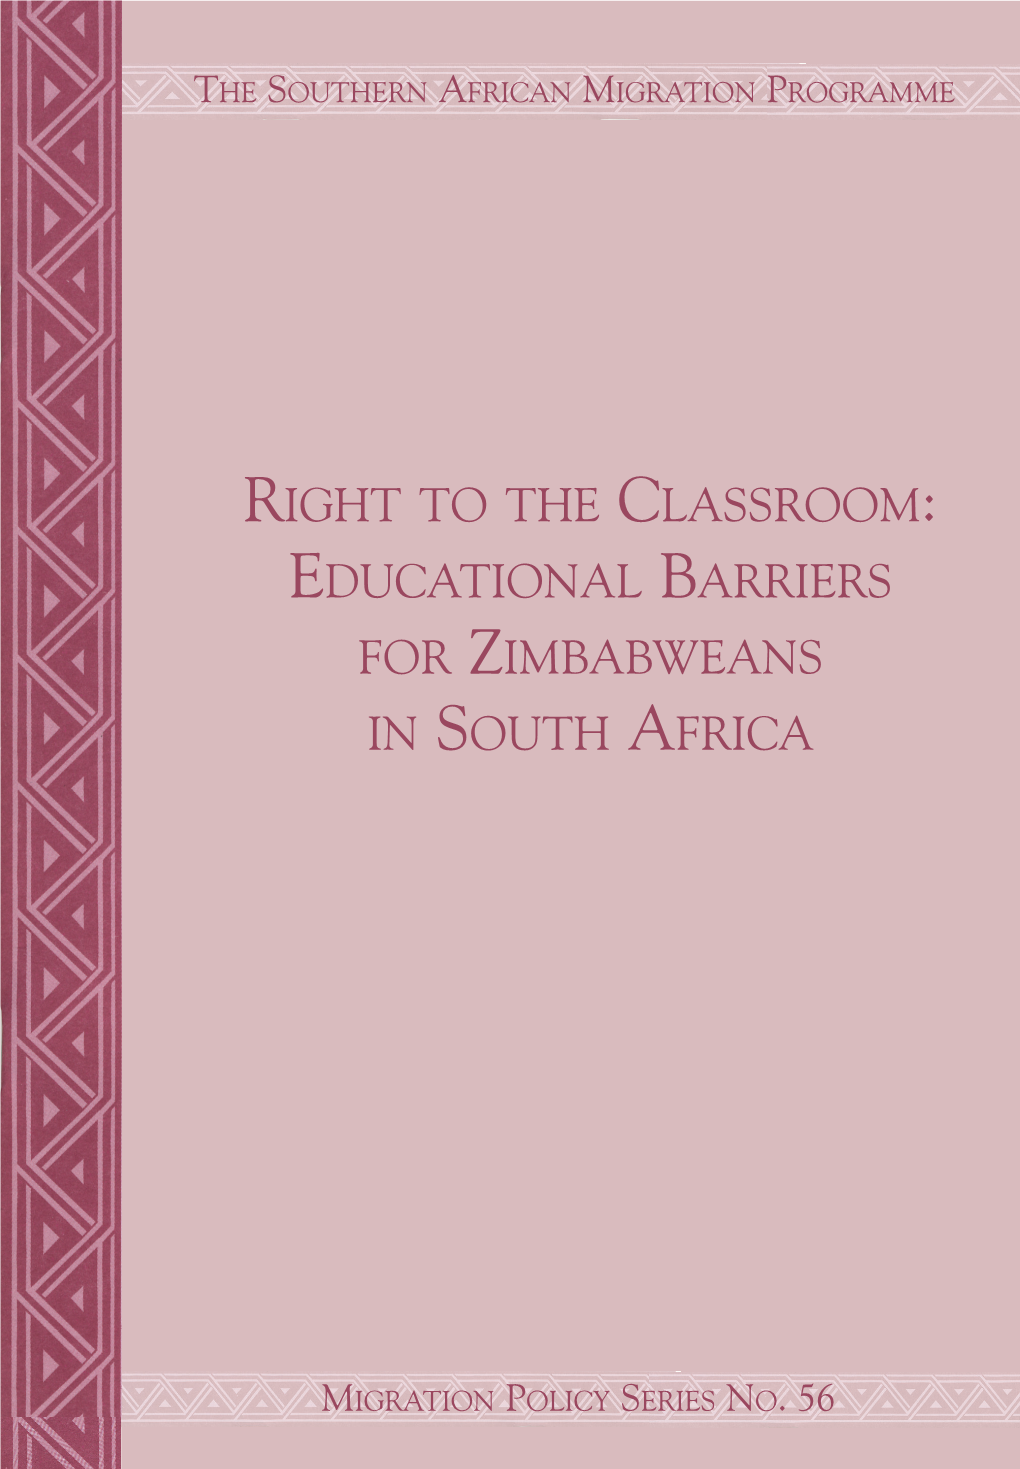 Educational Barriers for Zimbabweans in South Africa